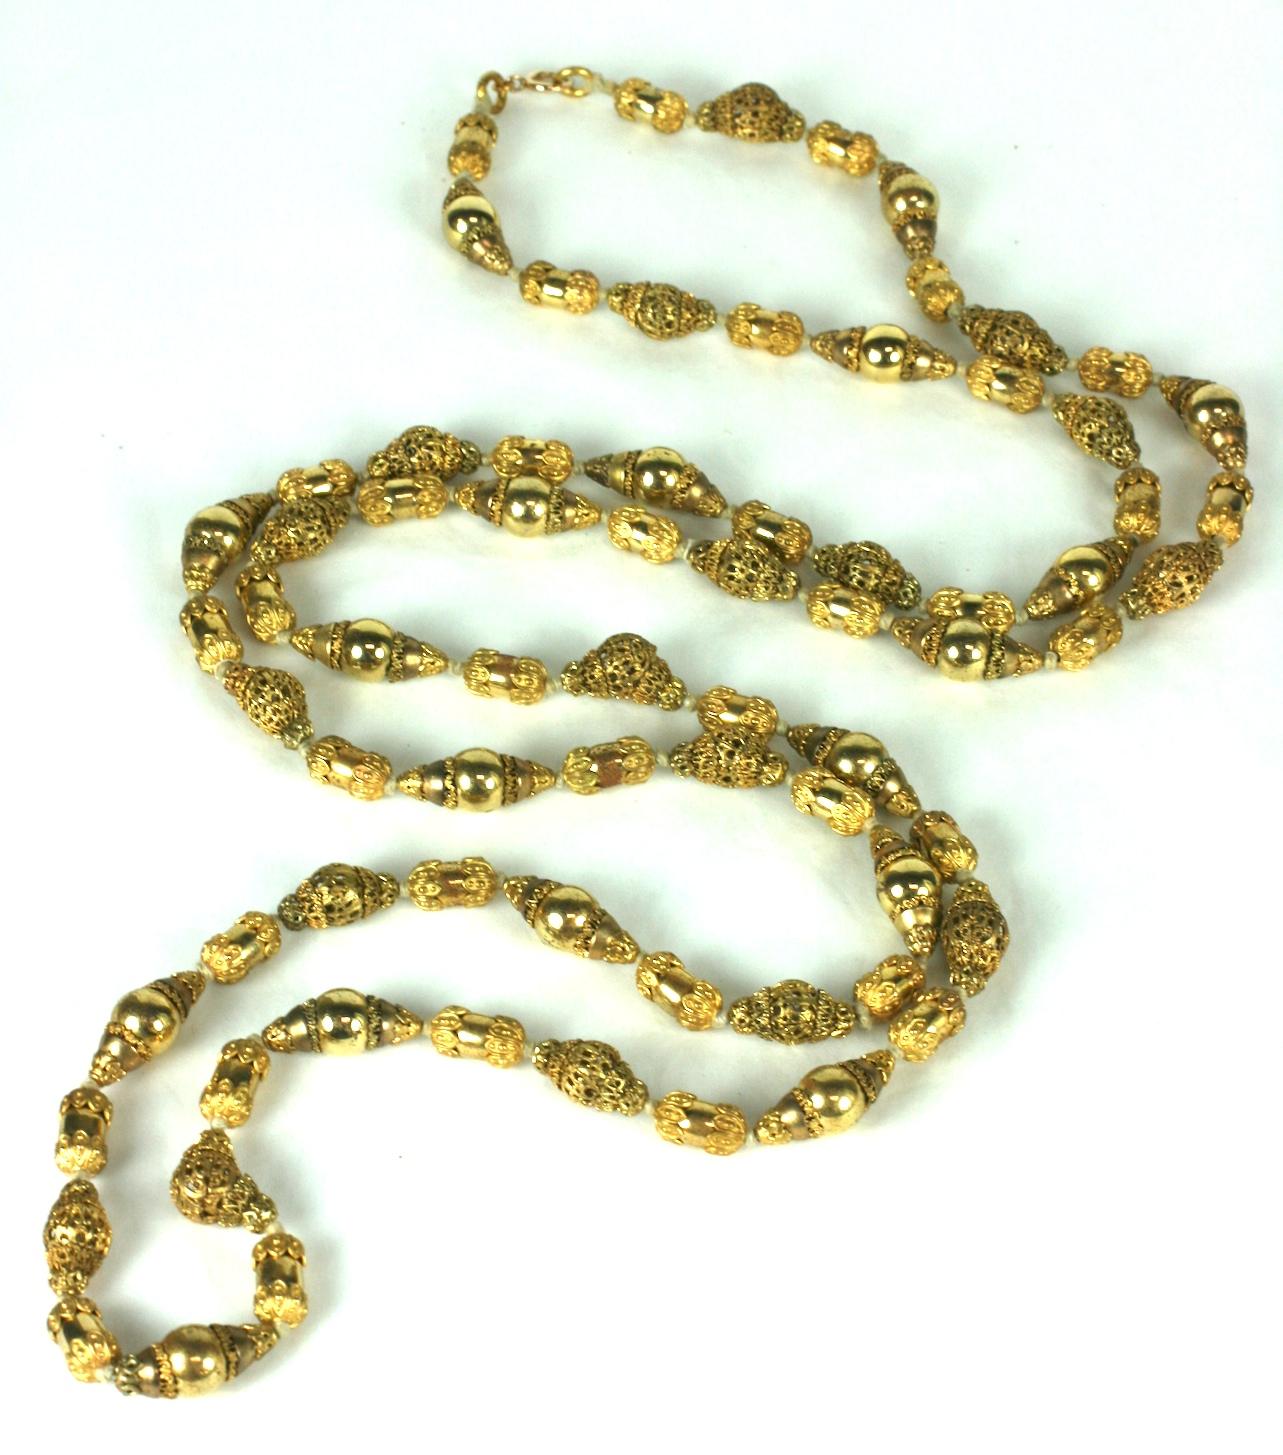 Coco Chanel Gilt Filigree Bead Long Necklace, Goossens. Long chain with gilt filigrees stacked and layered with polished gilt beads. A subtle play on matte and shiny in a long, transformable hand knotted bead necklace. 56